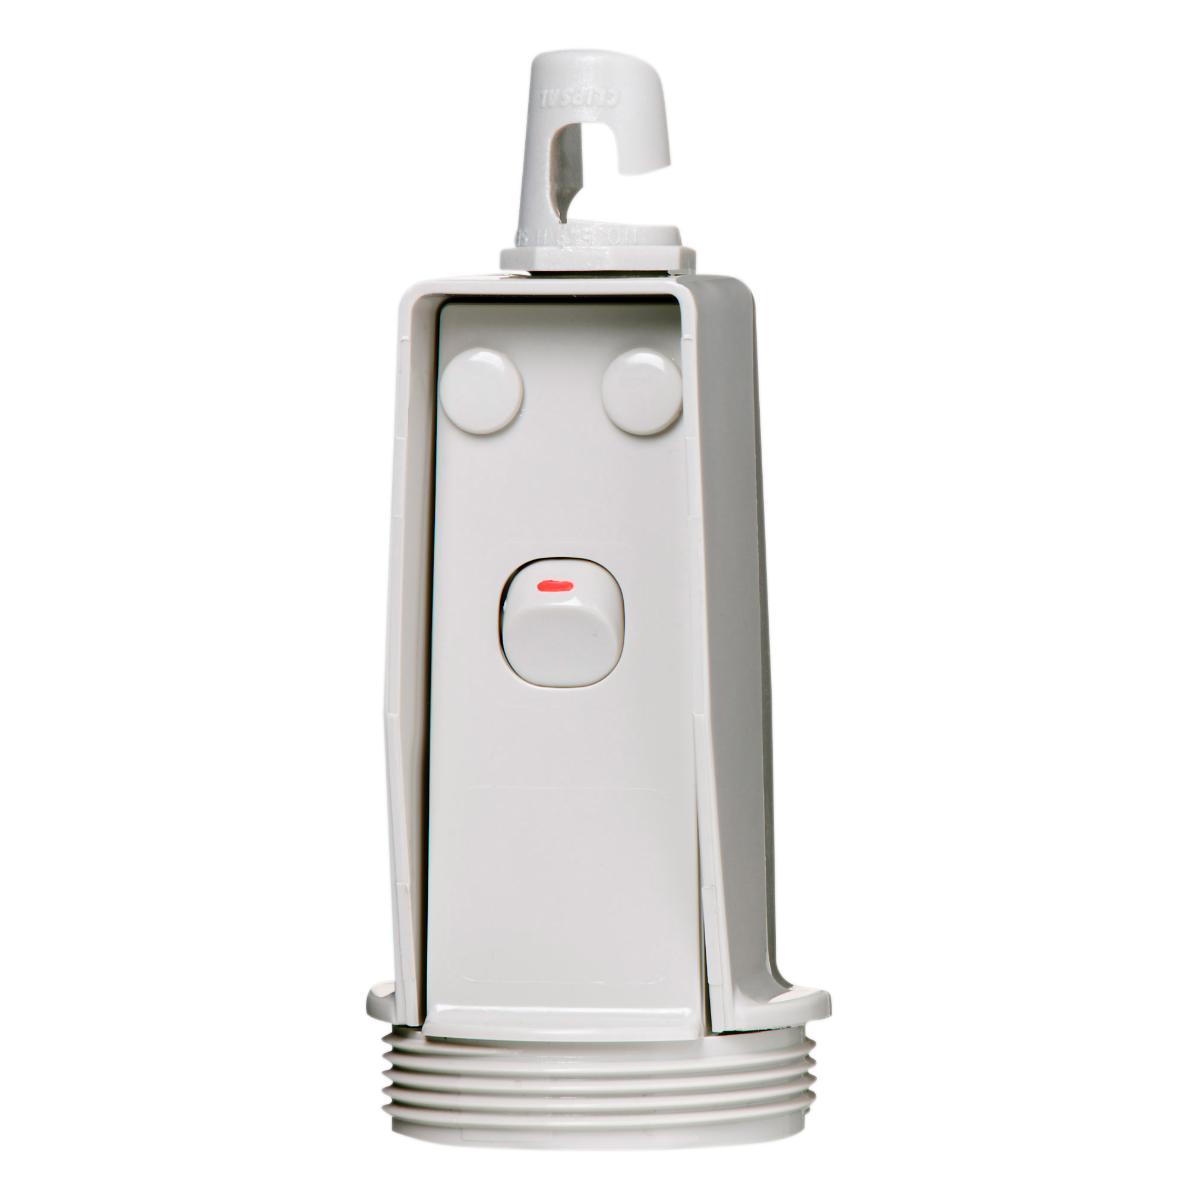 SWITCHED PENDANT OUTLET 10A 250V GREY